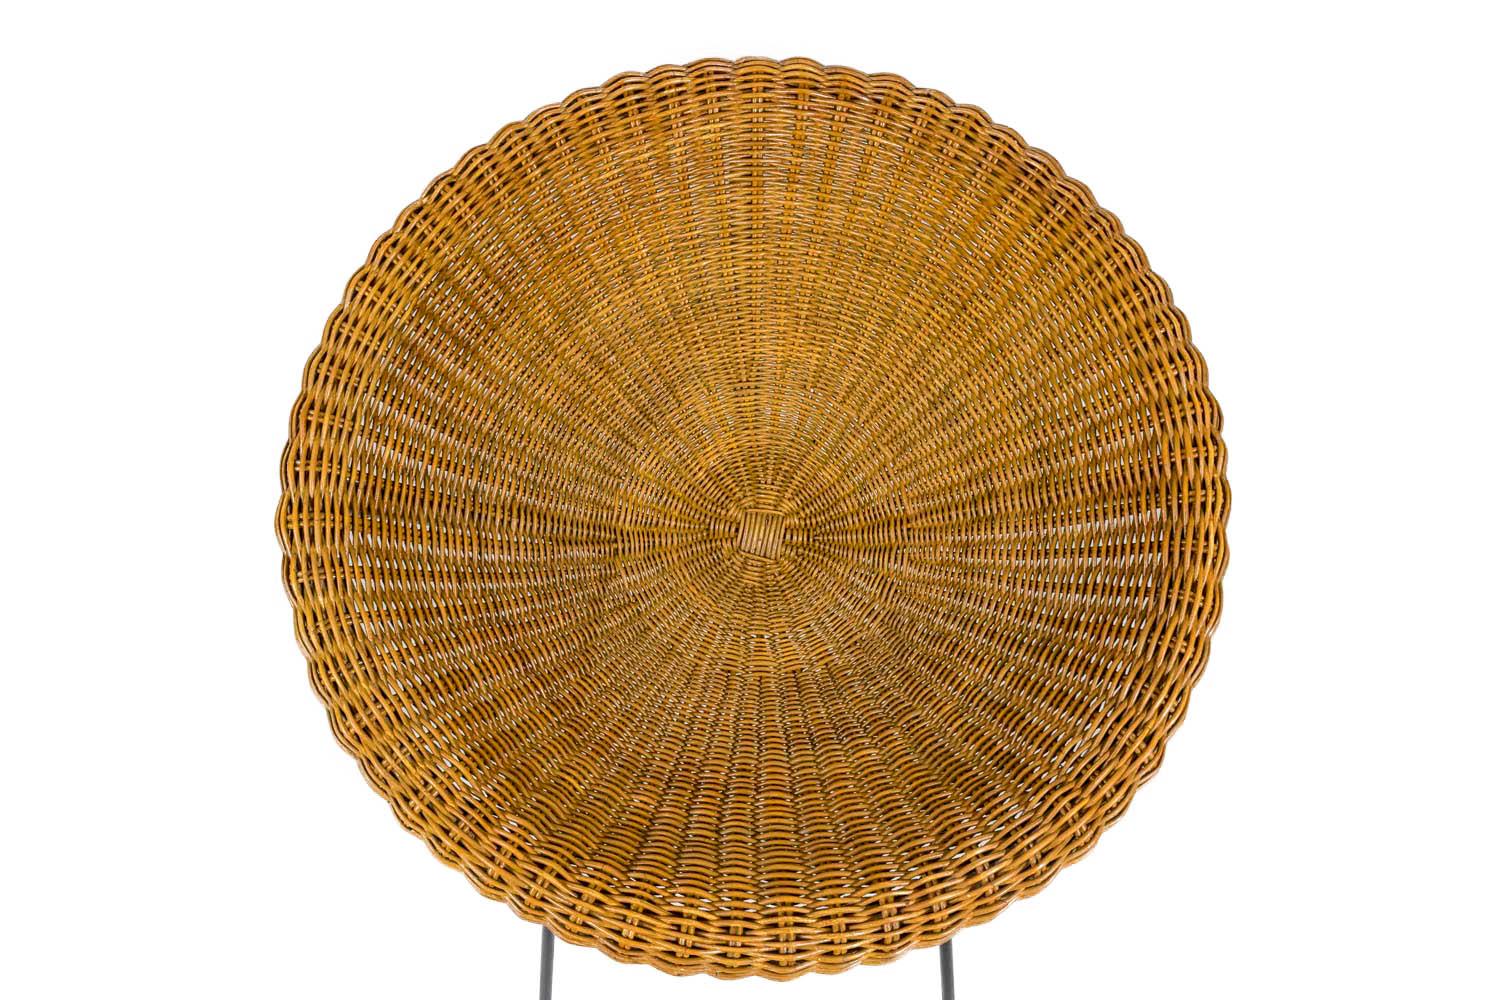 Mid-Century Modern Pair of Sun Chairs in Wicker and Black Metal, 1950s For Sale